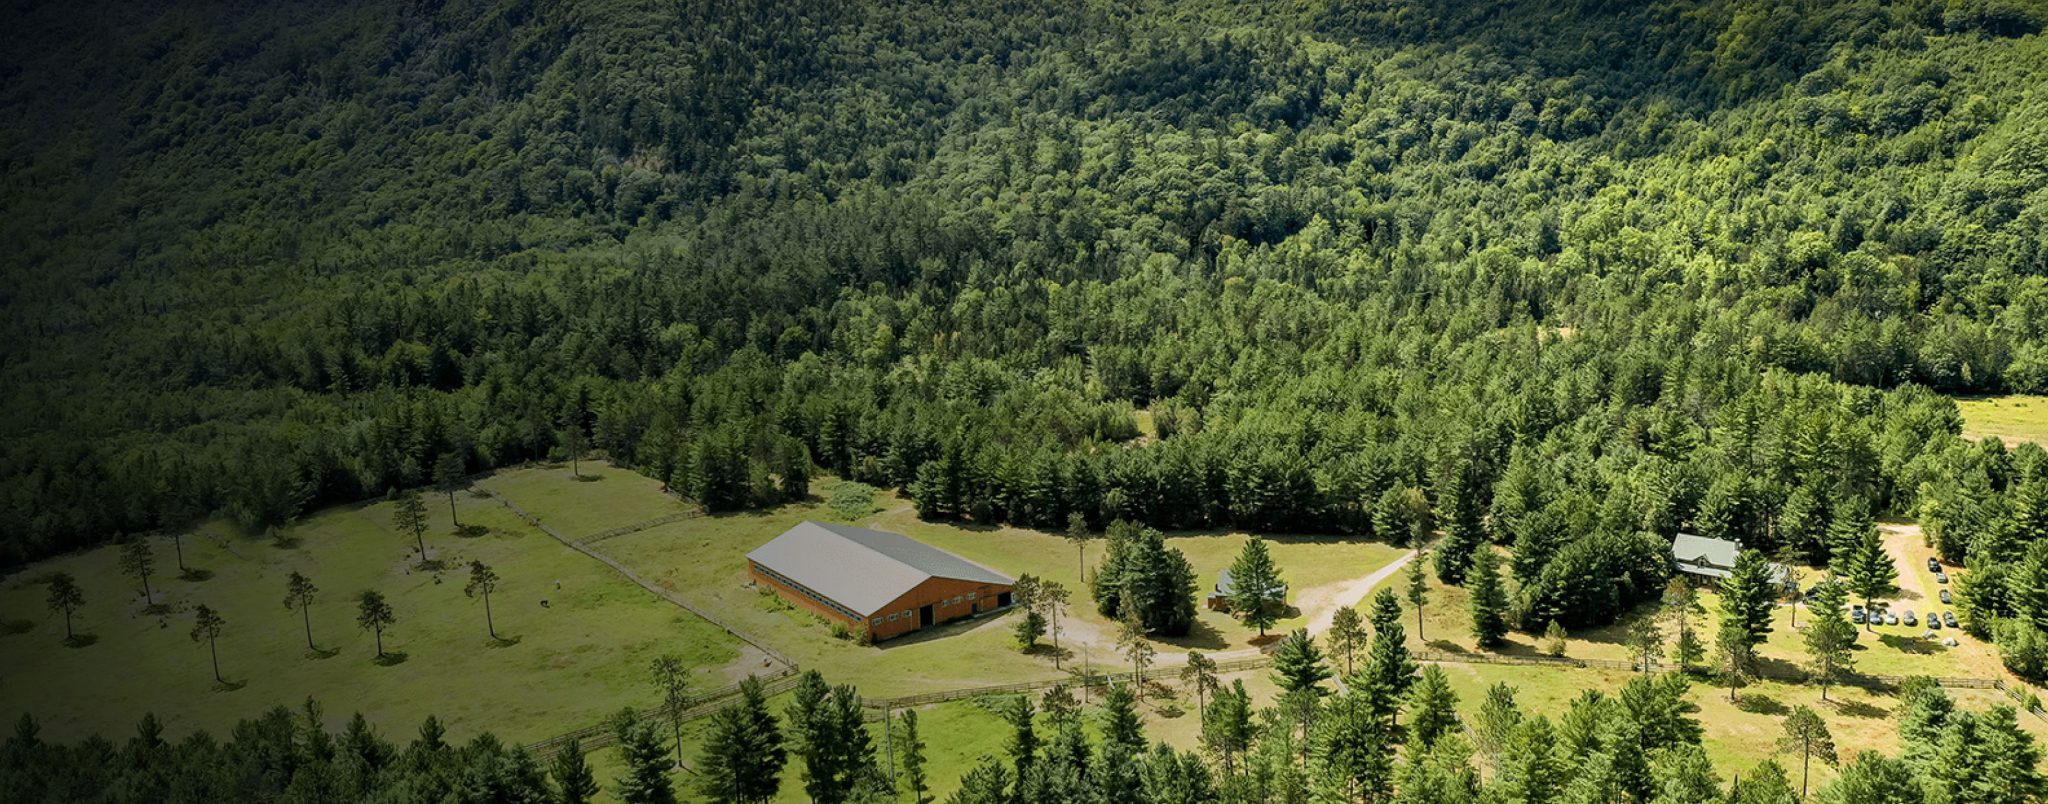 An aerial view of the Foundation House ranch surrounded by deep forest.